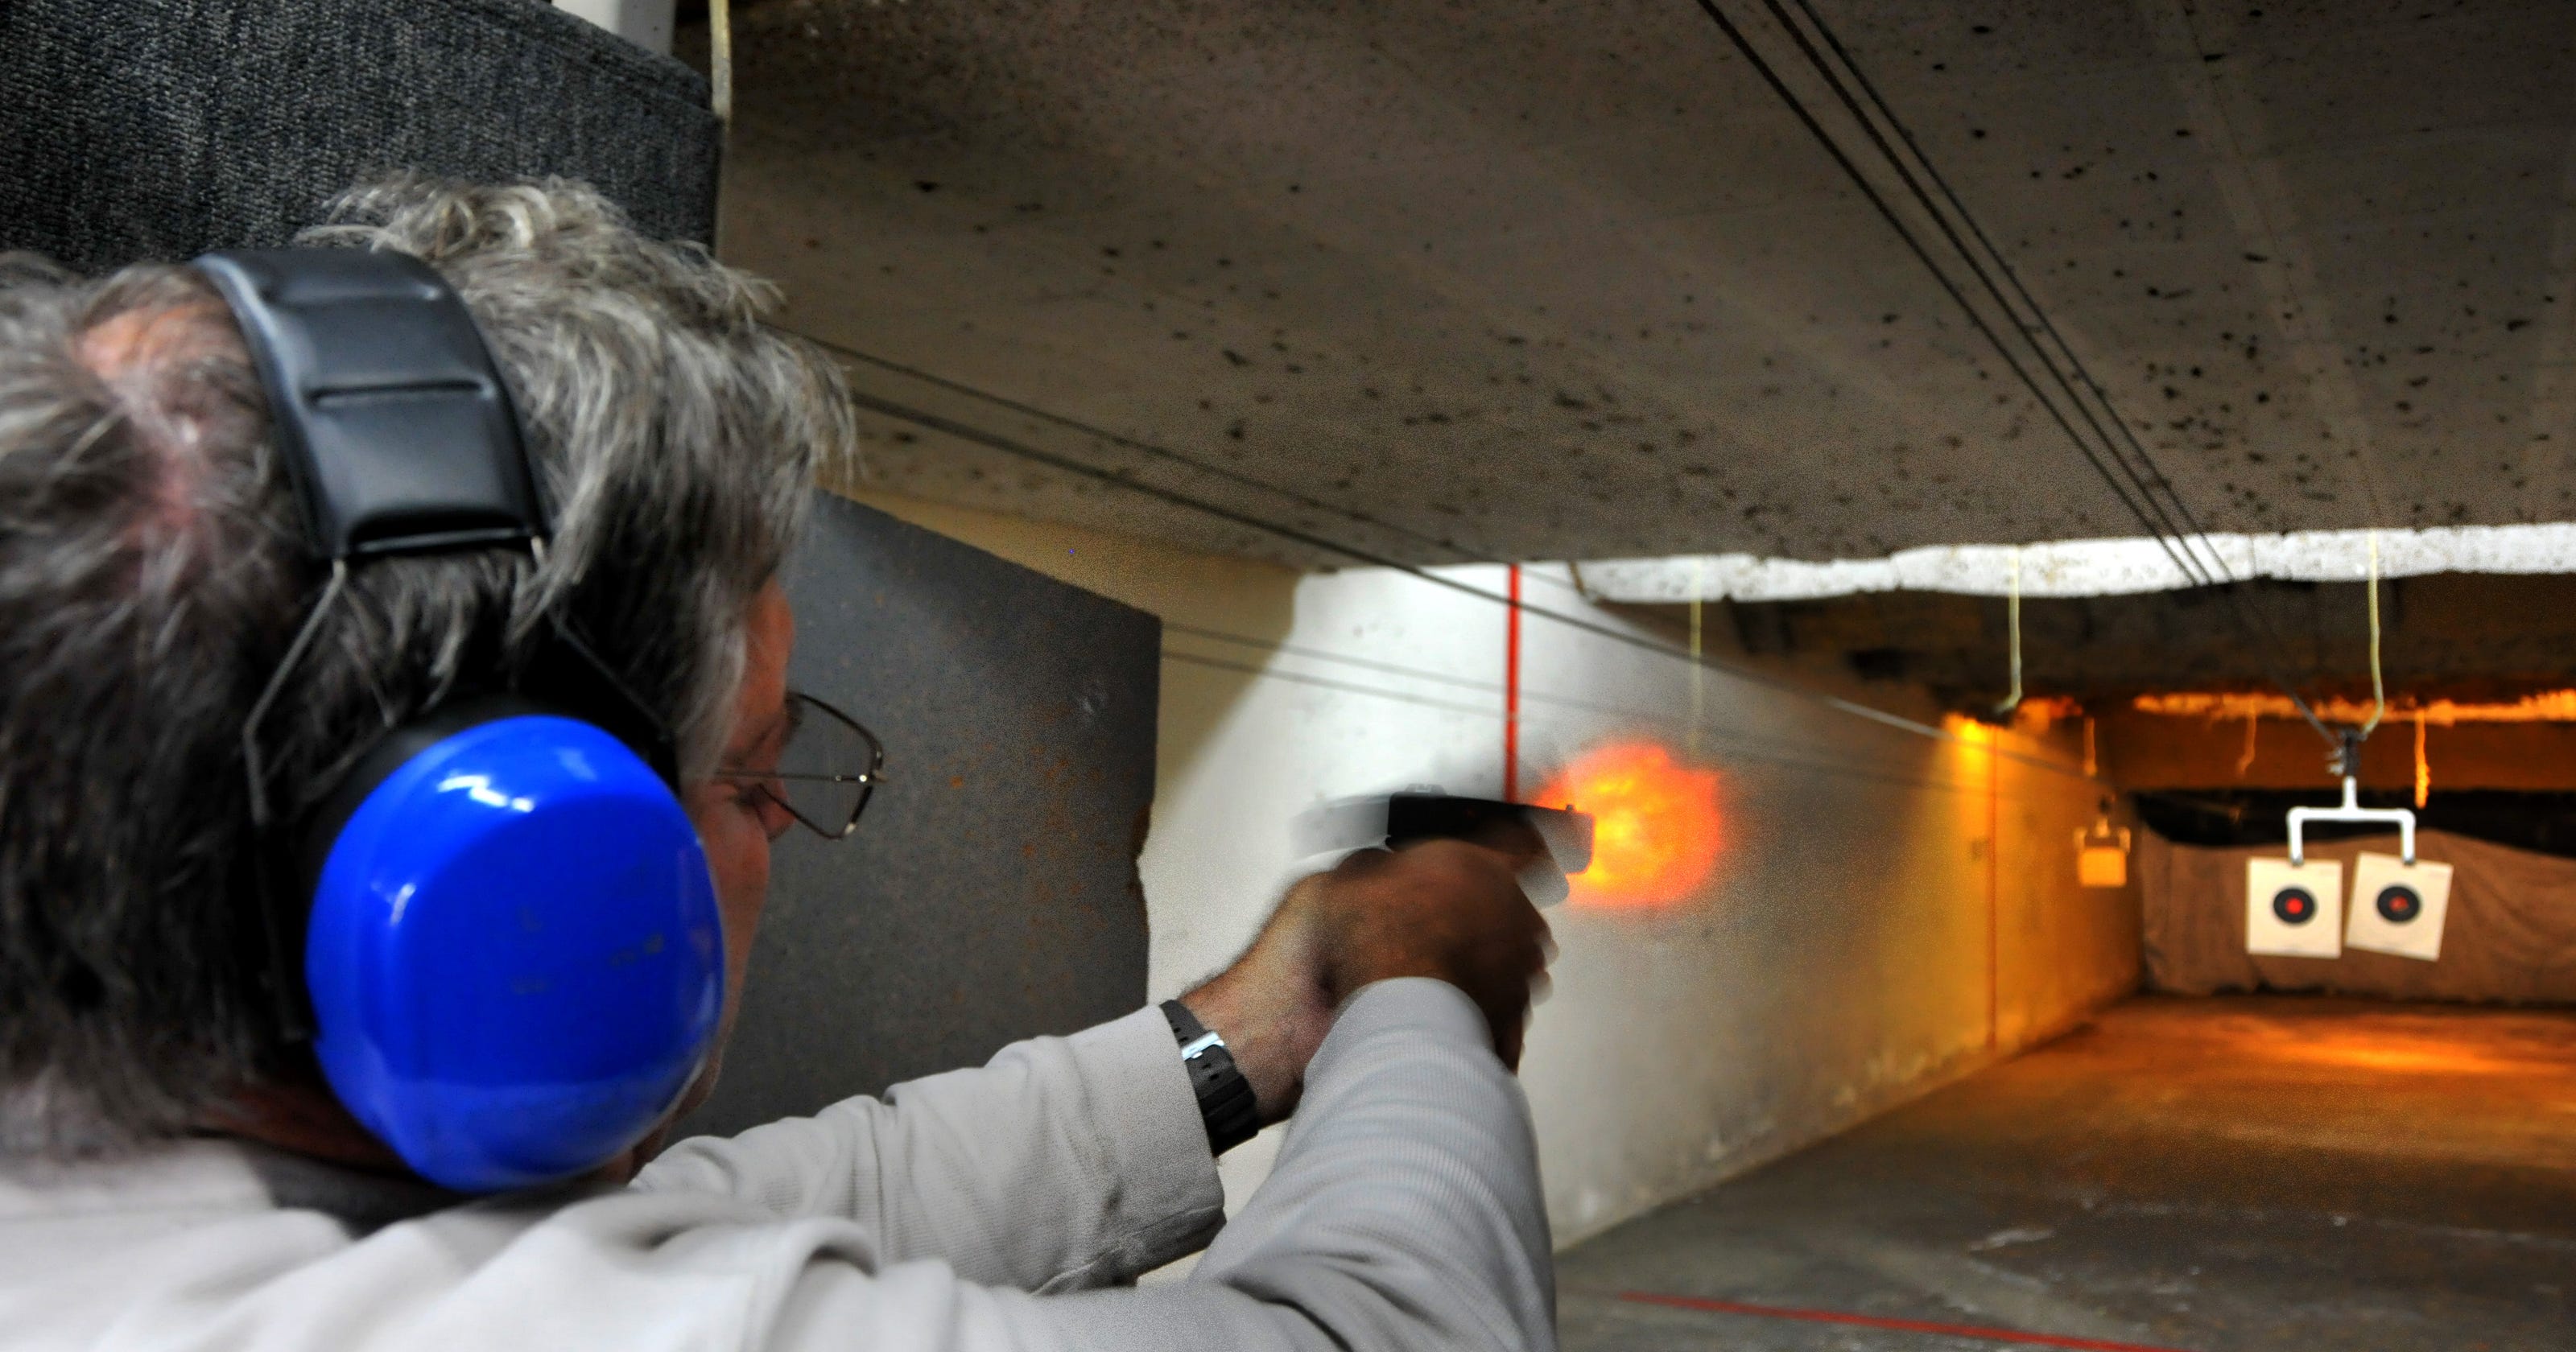 Melbourne gun range takes aim at new breed of shooters